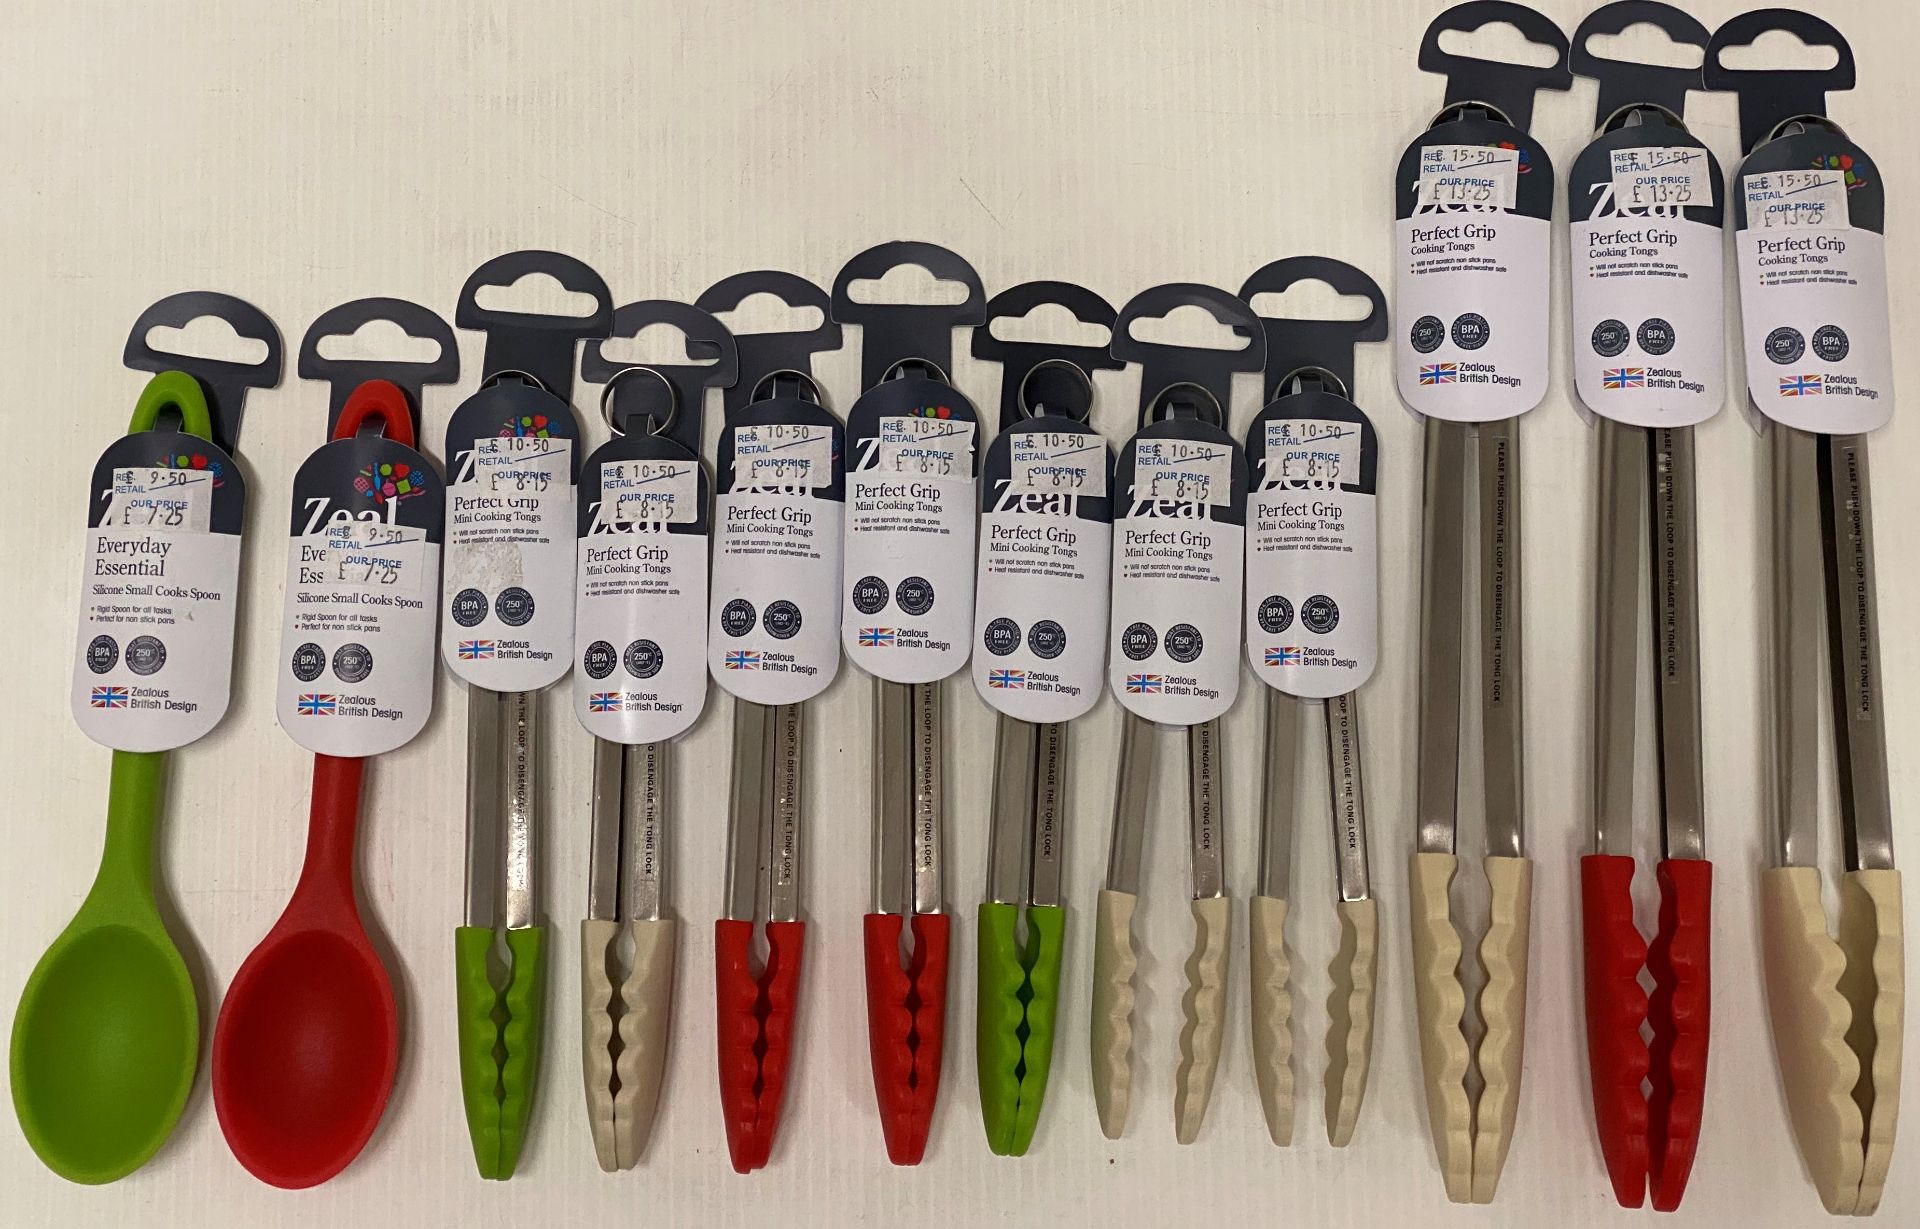 12 x Zeal kitchen accessories - Perfect grip tongs (RRP £15.50), mini tongs (RRP £10.